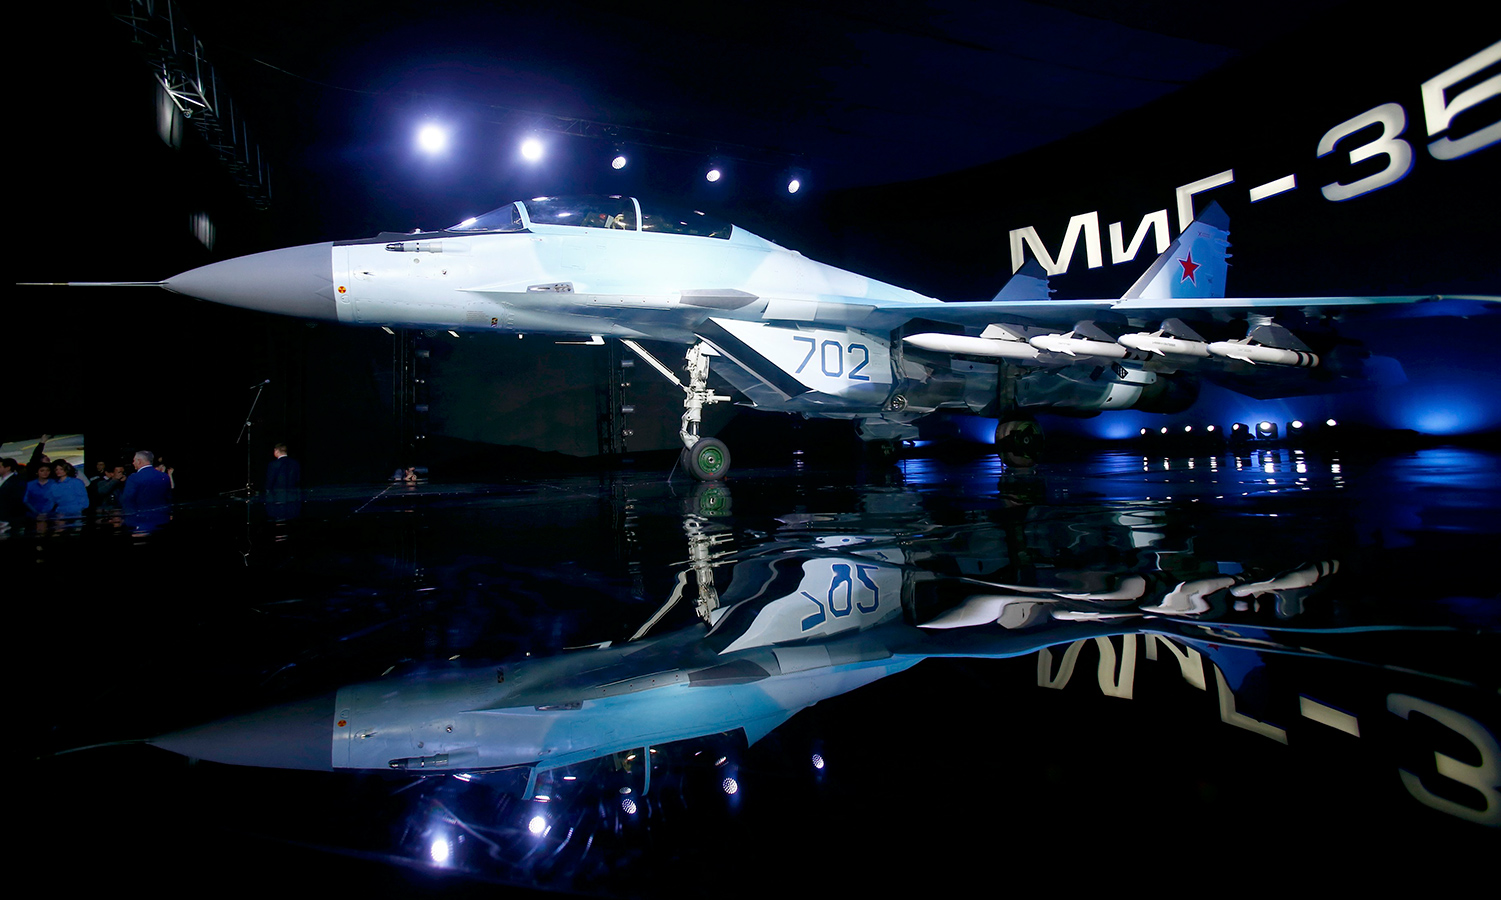 A new multi-role Russian MiG-35 fighter is displayed during its international presentation at the MiG plant in Lukhovitsy outside Moscow, Russia.